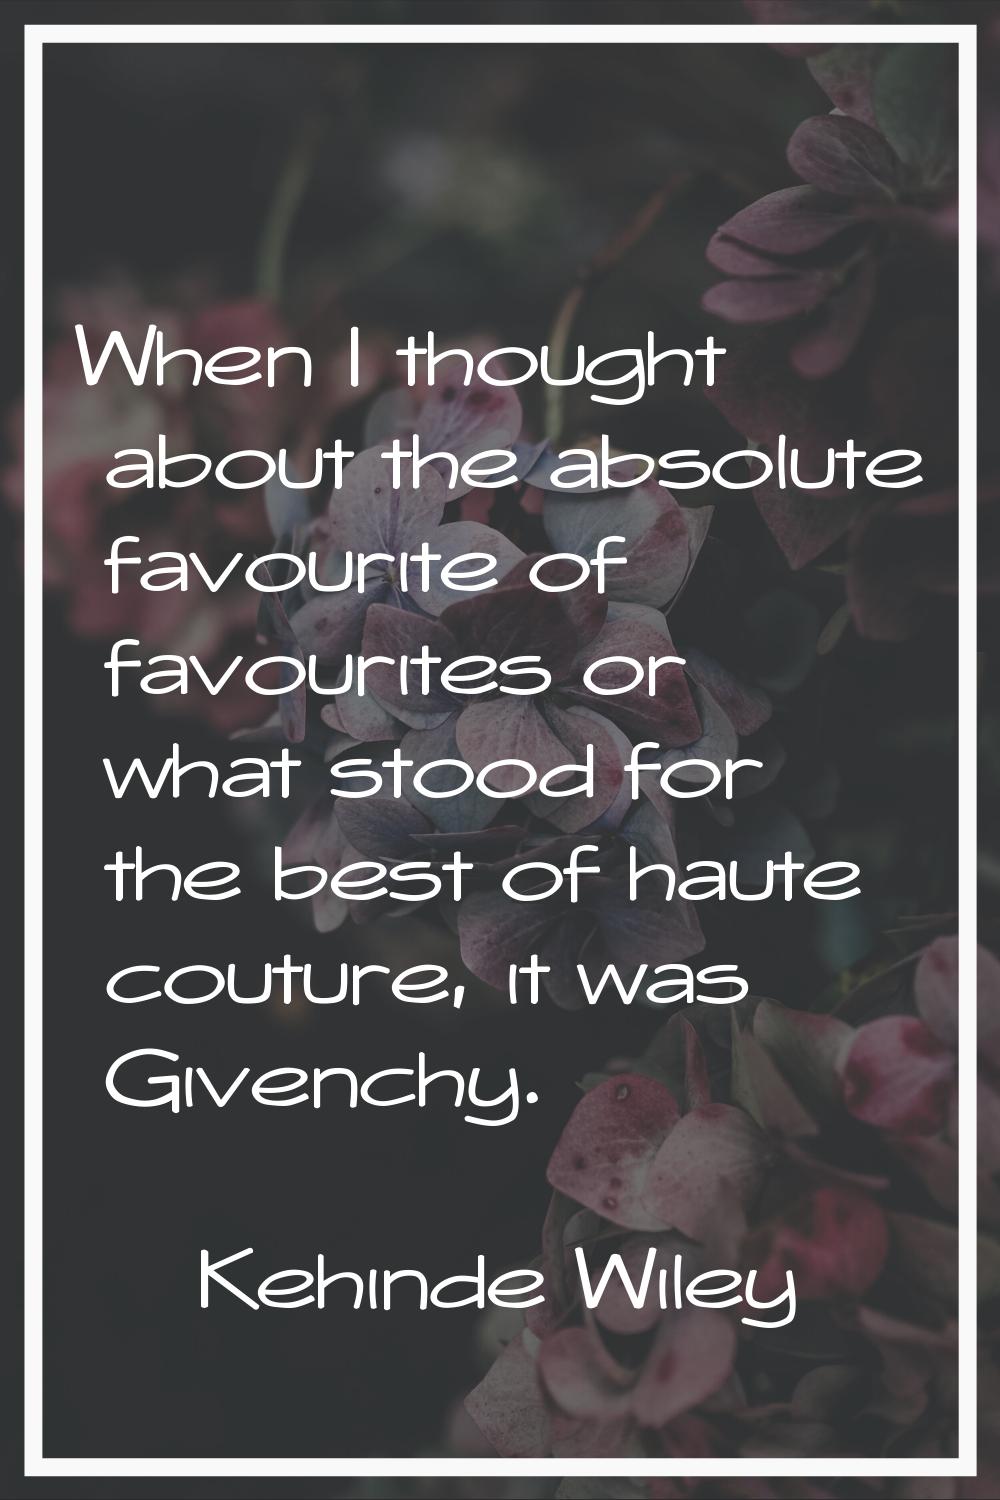 When I thought about the absolute favourite of favourites or what stood for the best of haute coutu